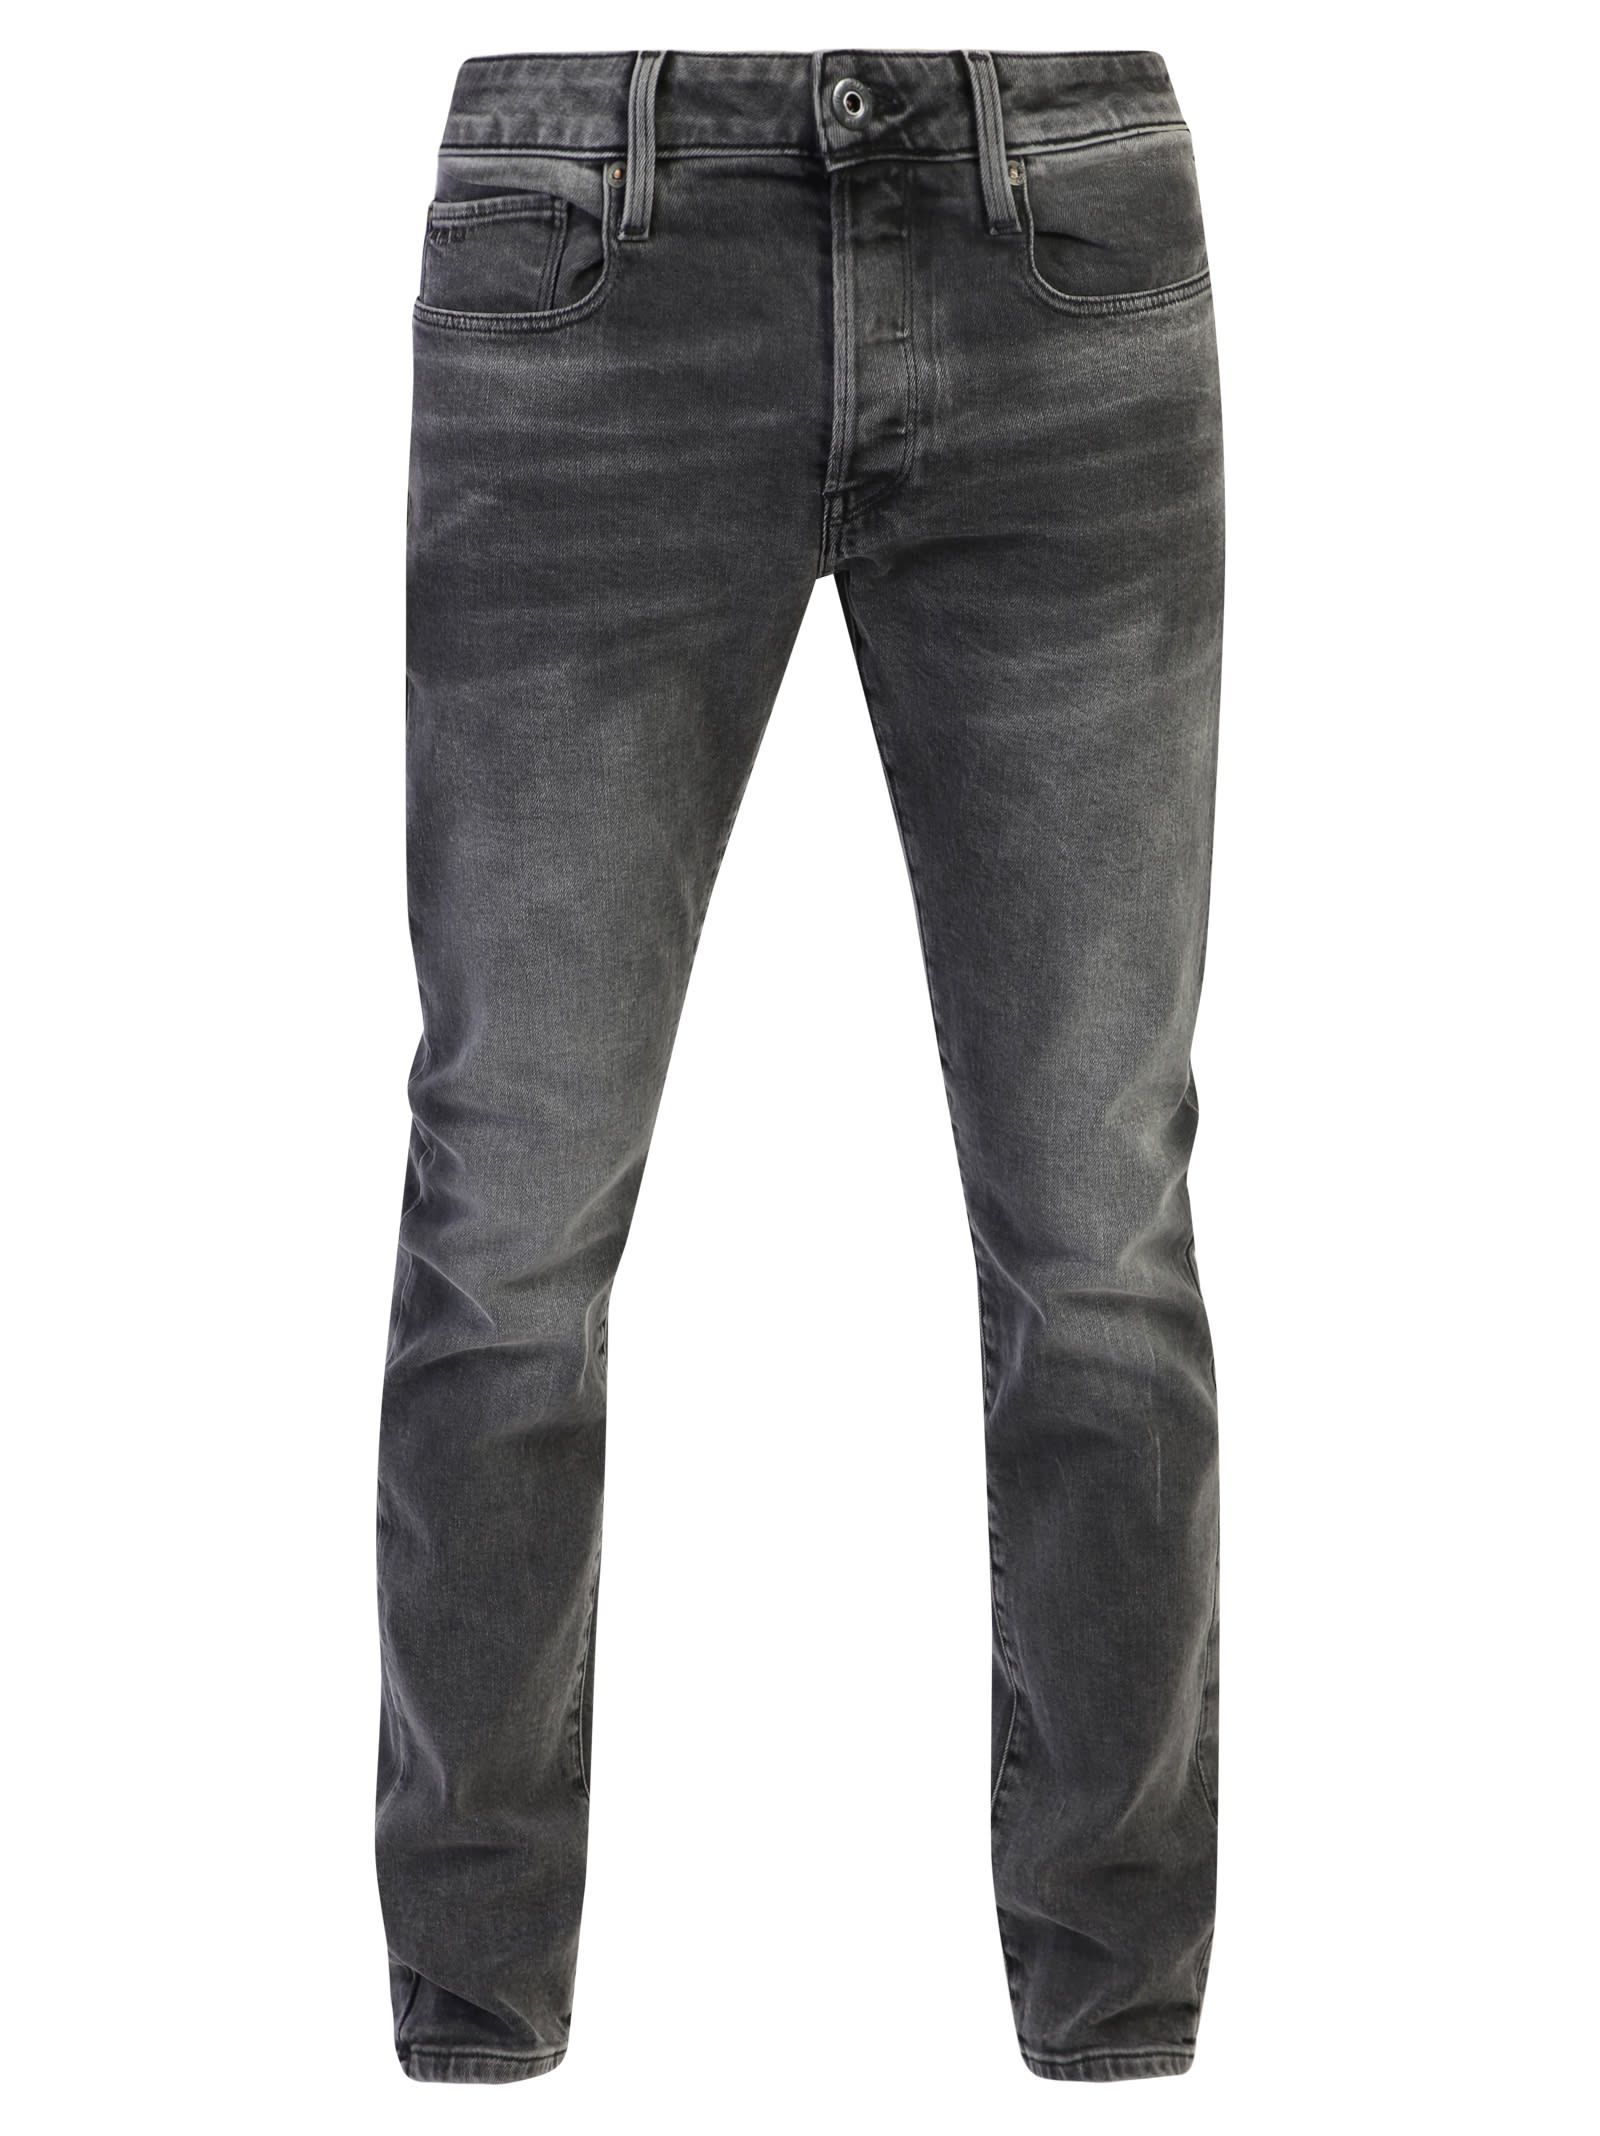 g star raw jeans on sale